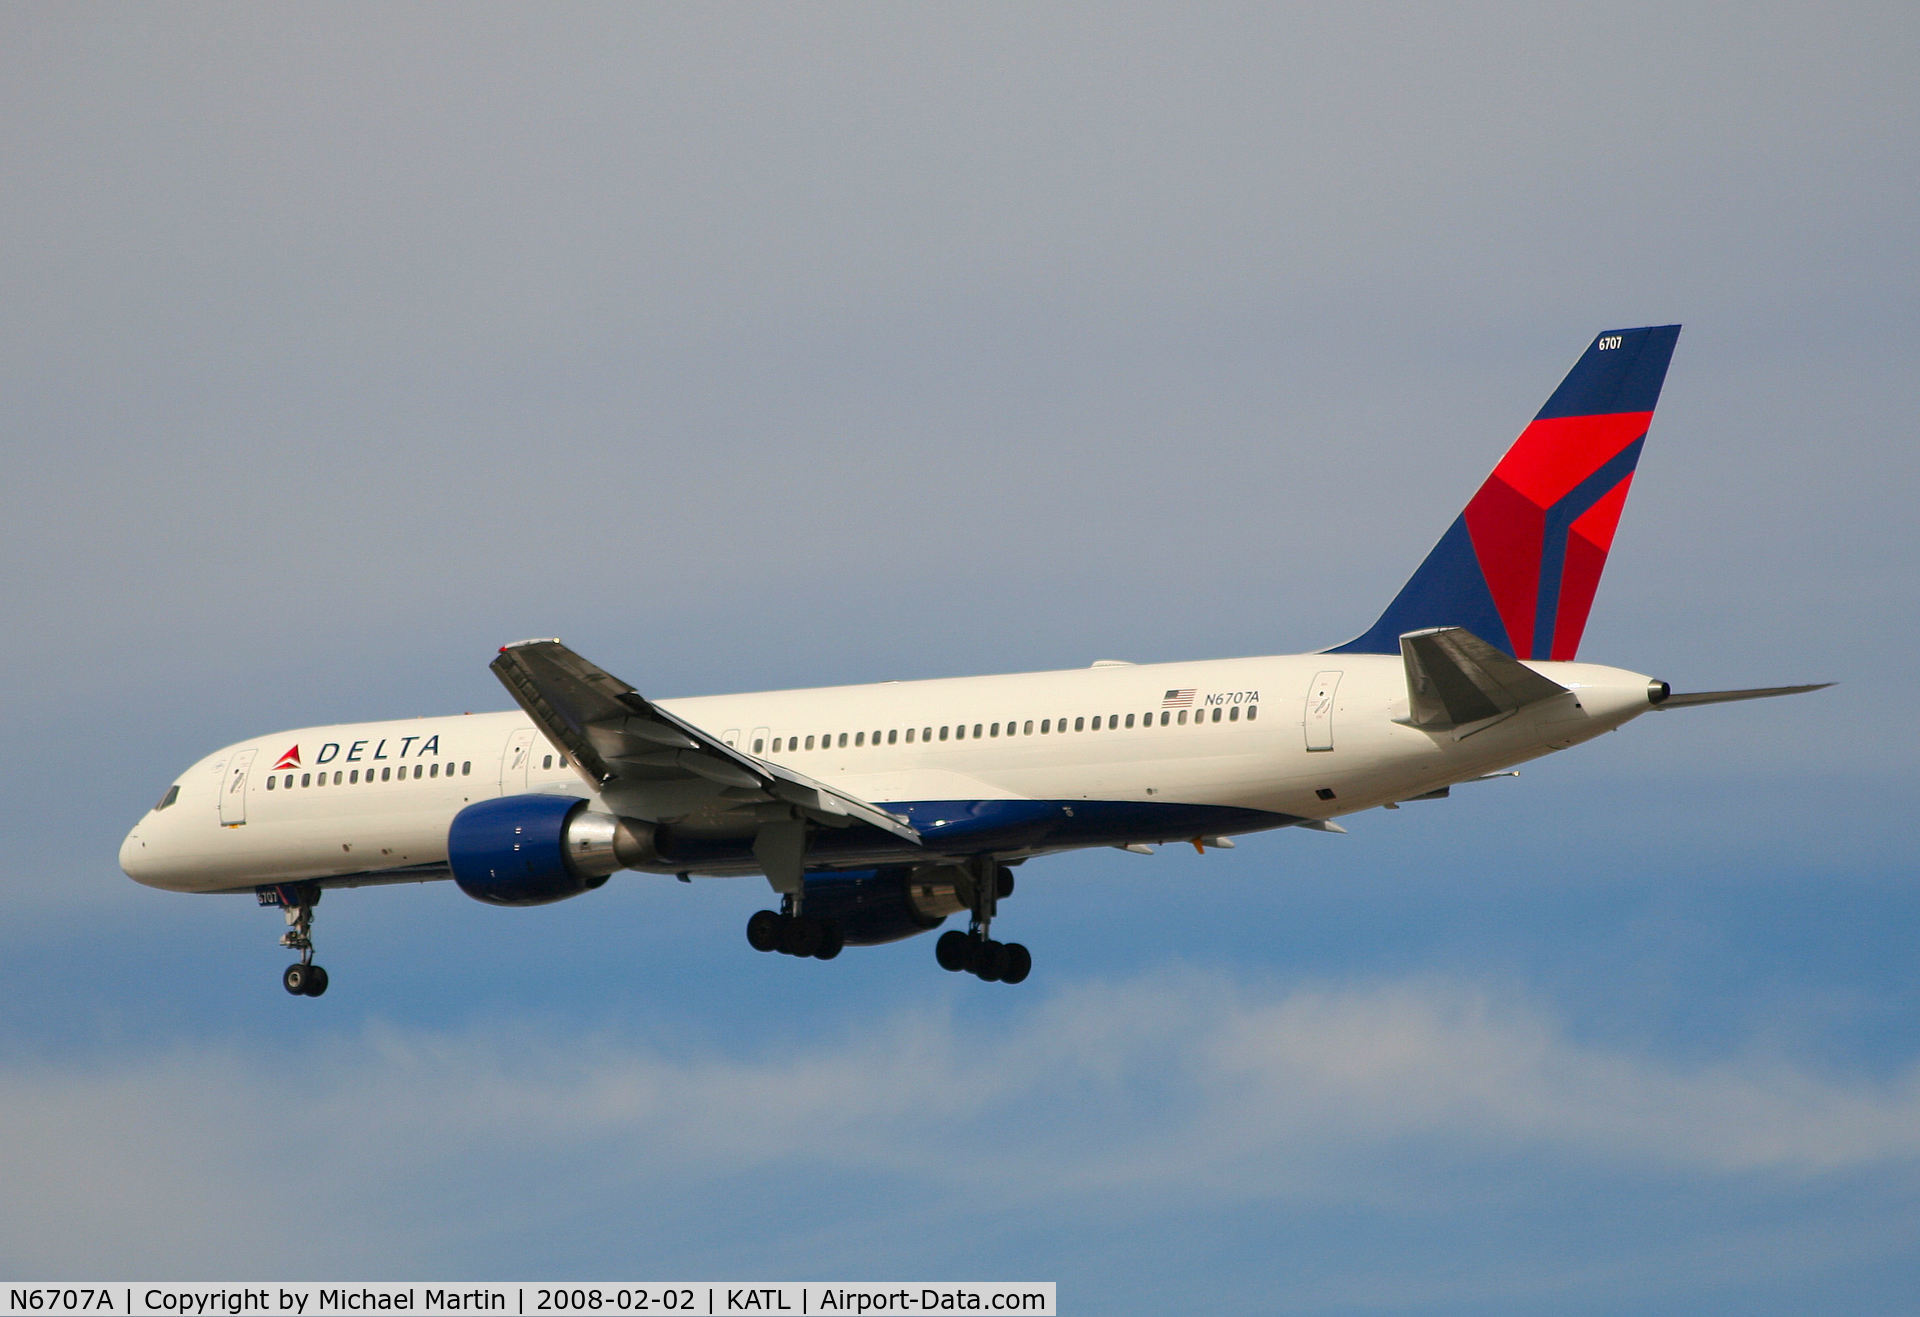 N6707A, 2000 Boeing 757-232 C/N 30395, Over the numbers of 26R